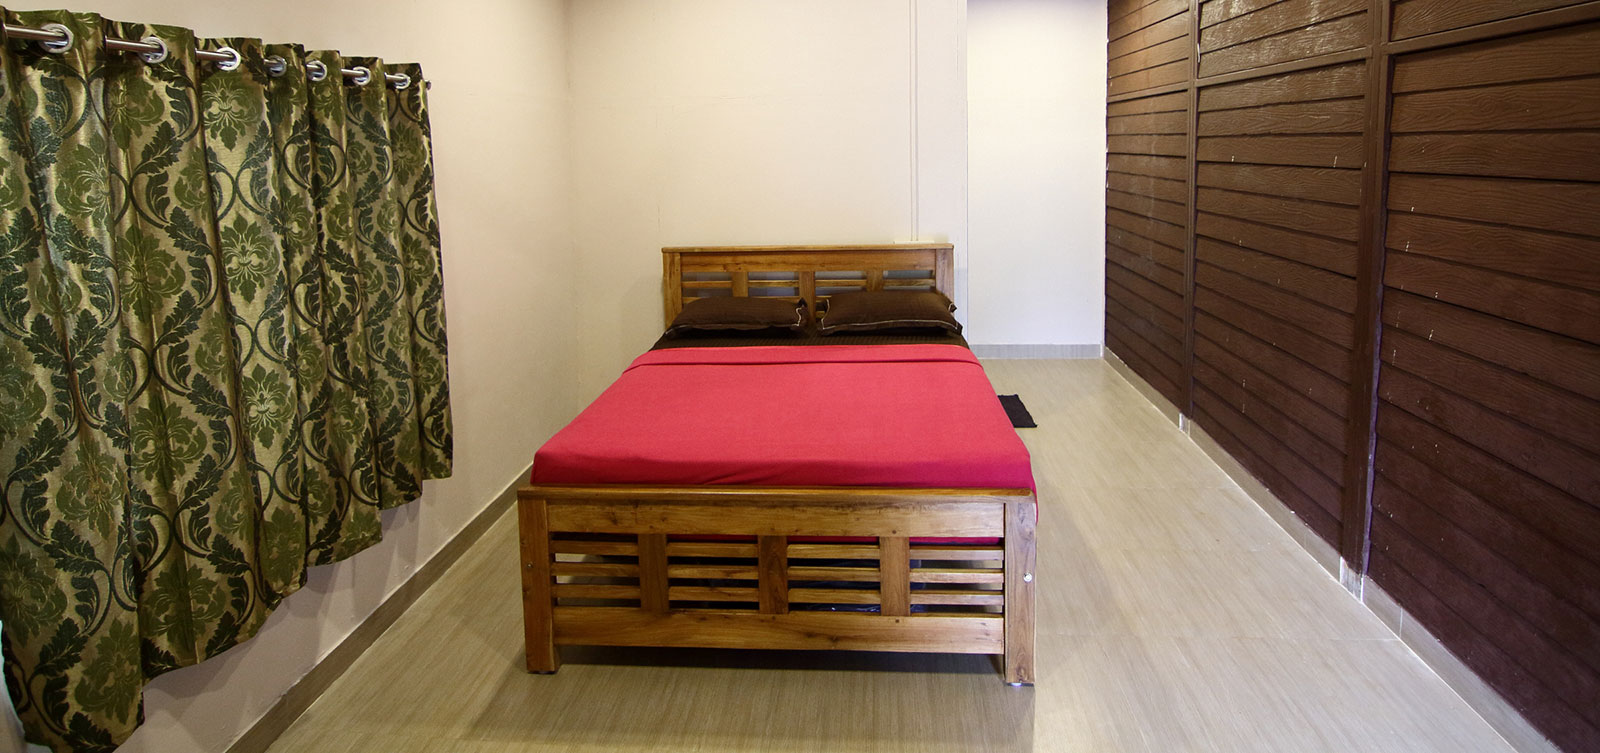 coorg-rooms